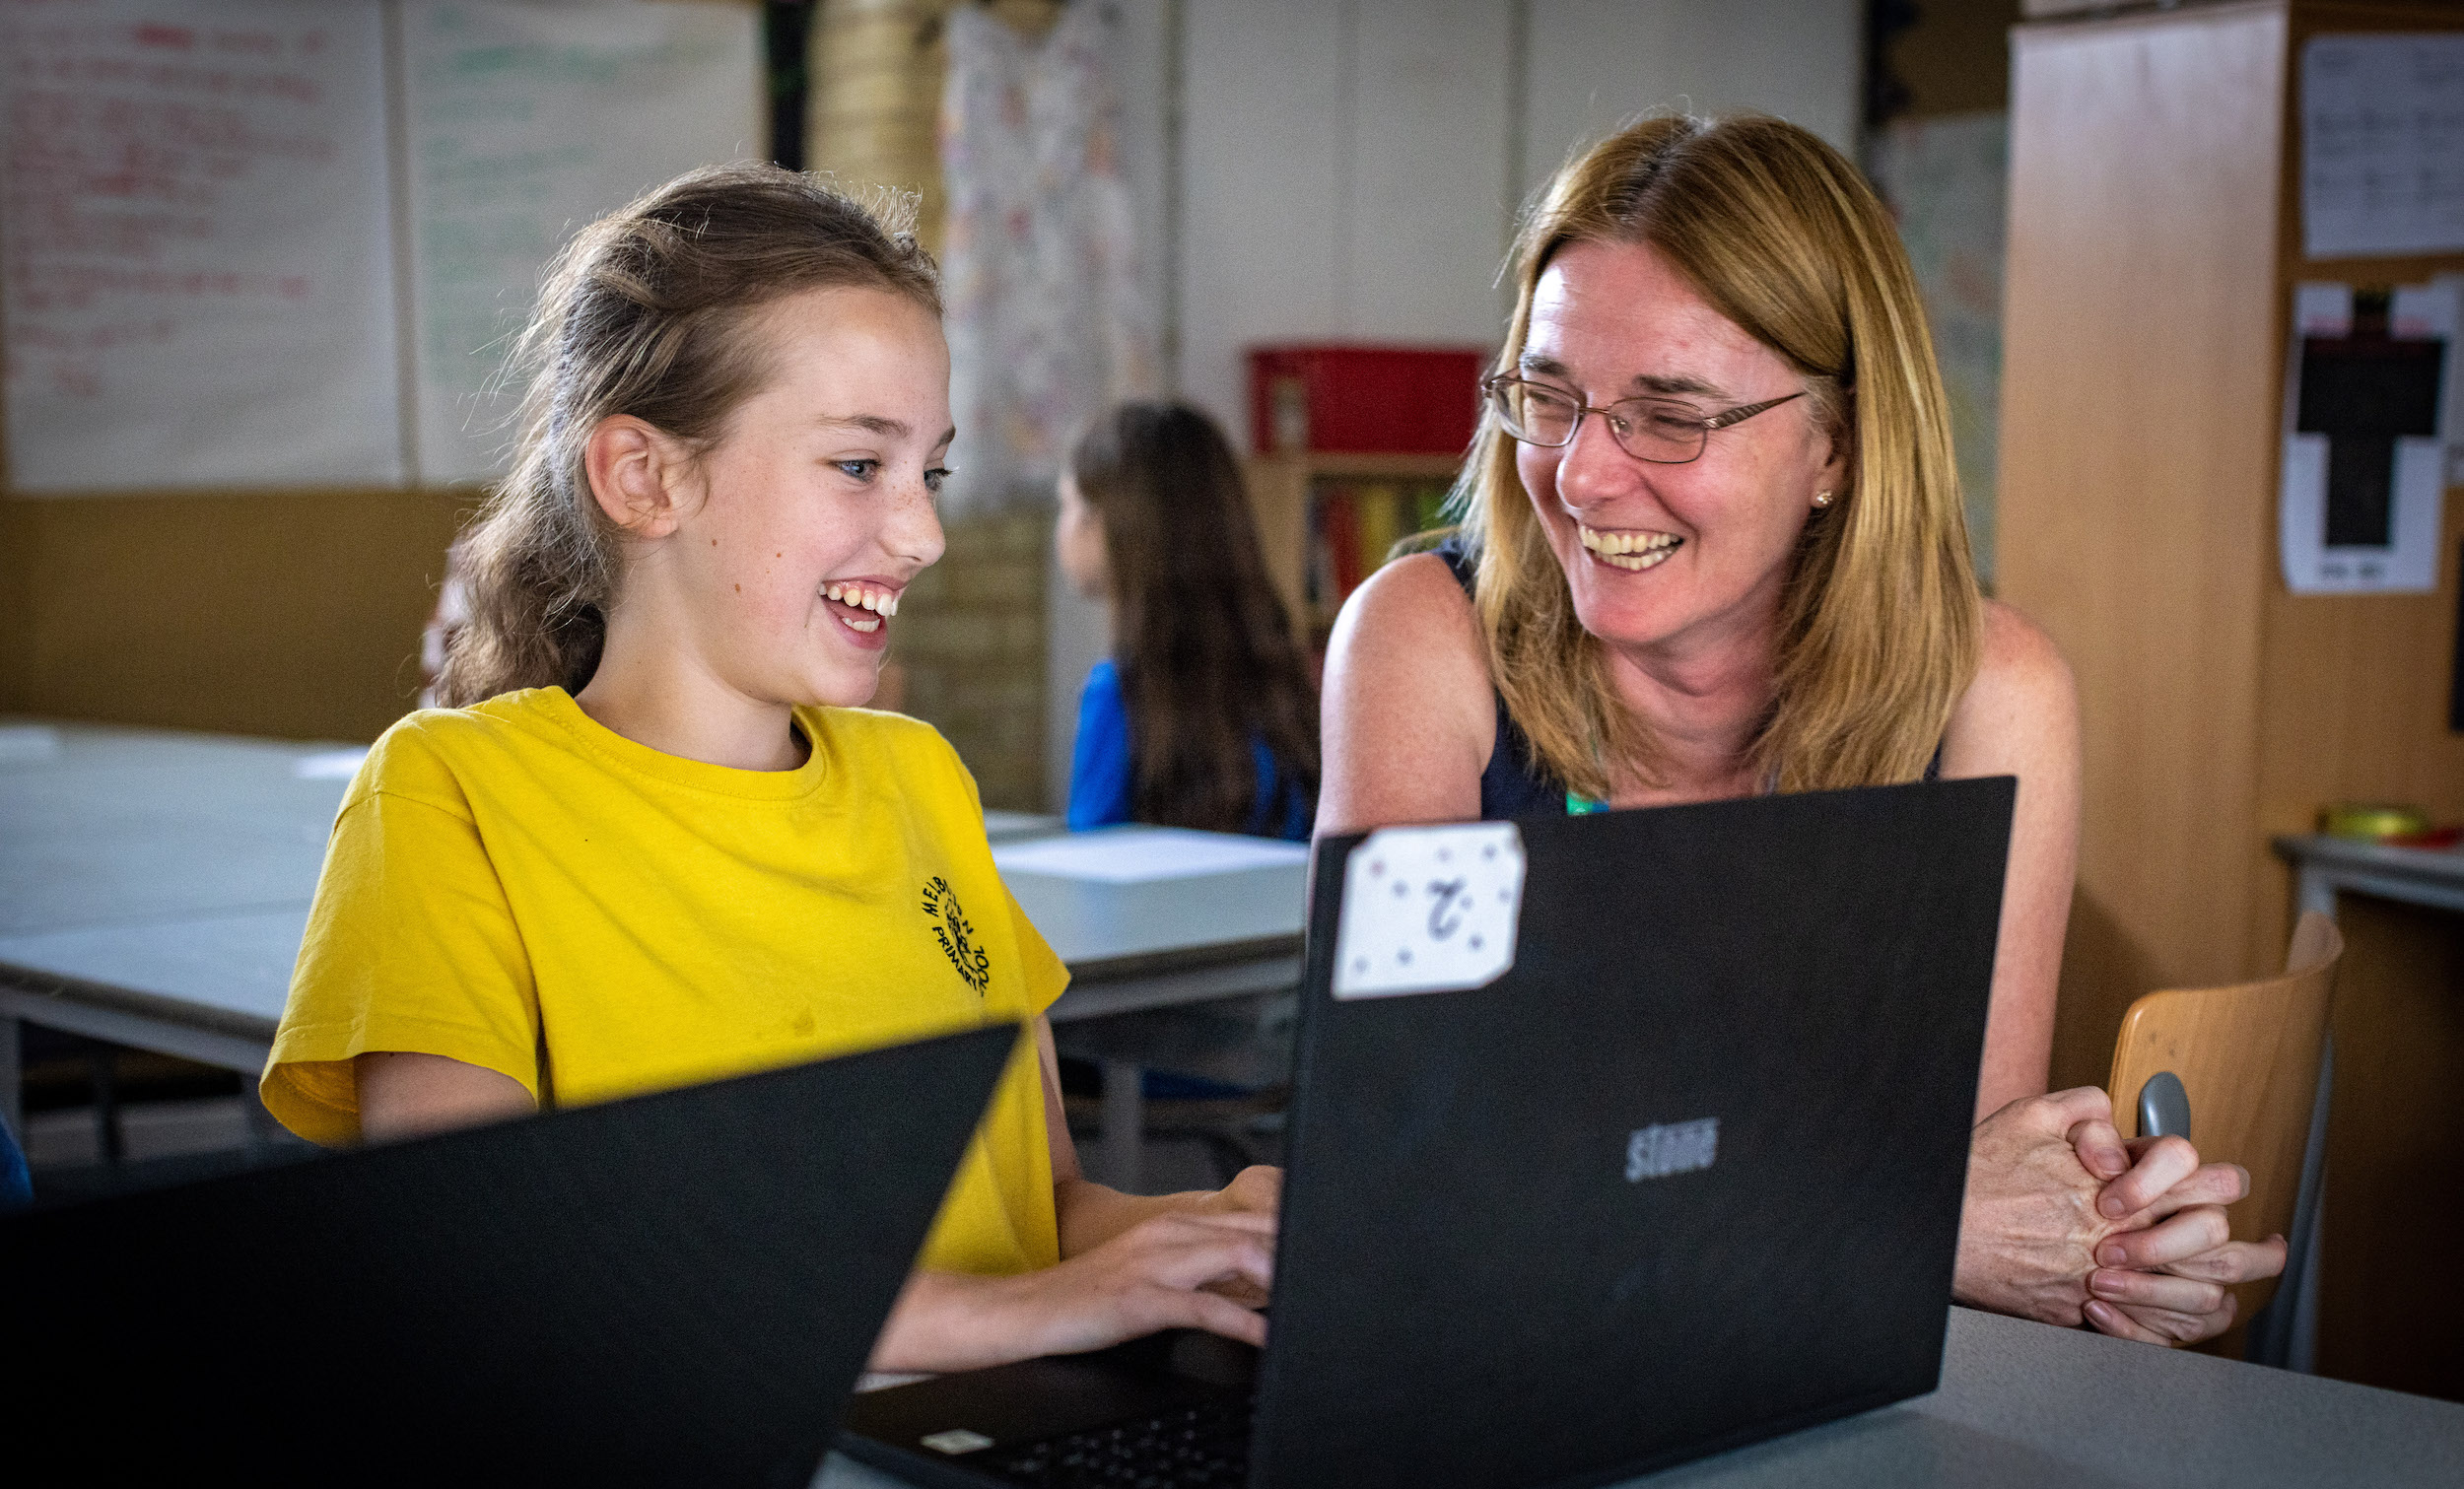 A Code Club member and volunteer code together at a laptop